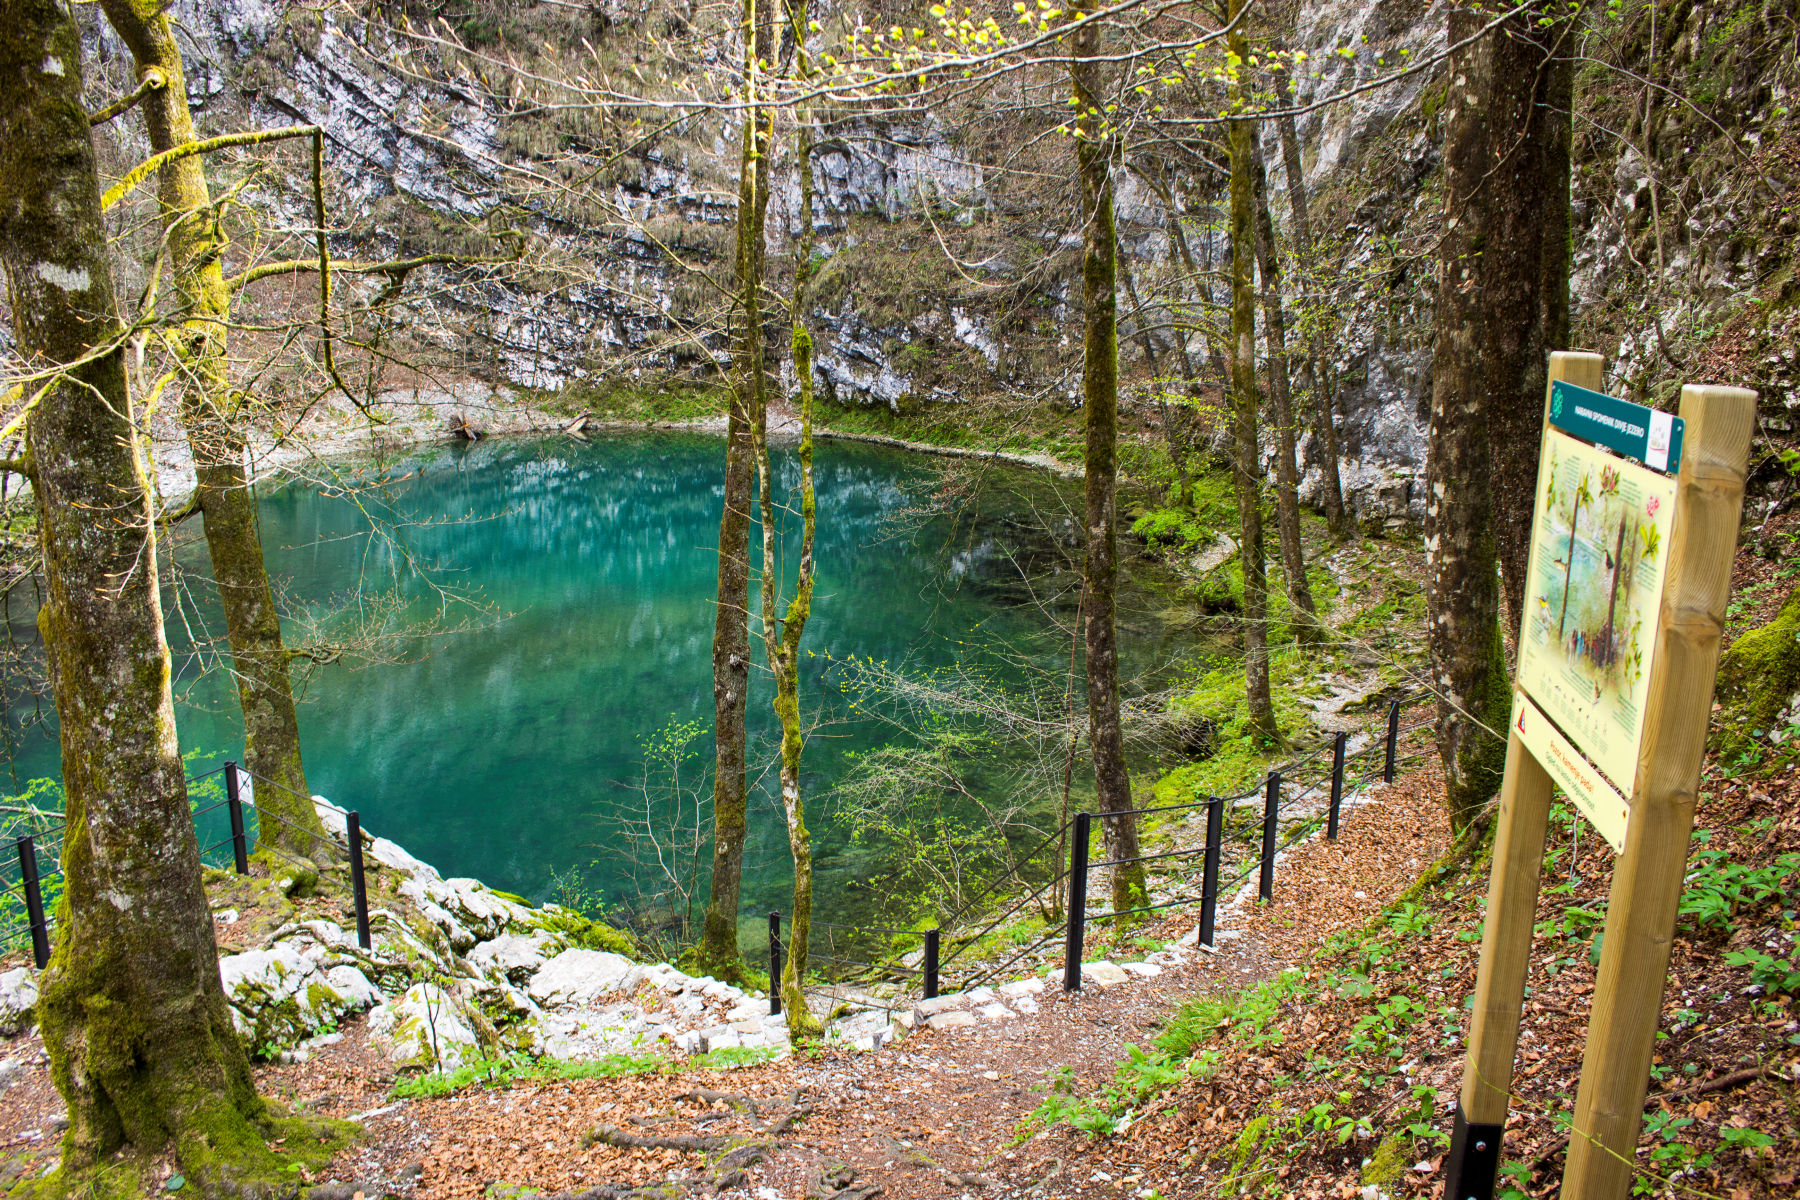 All You Need To Know To Visit The Wild Lake In Slovenia